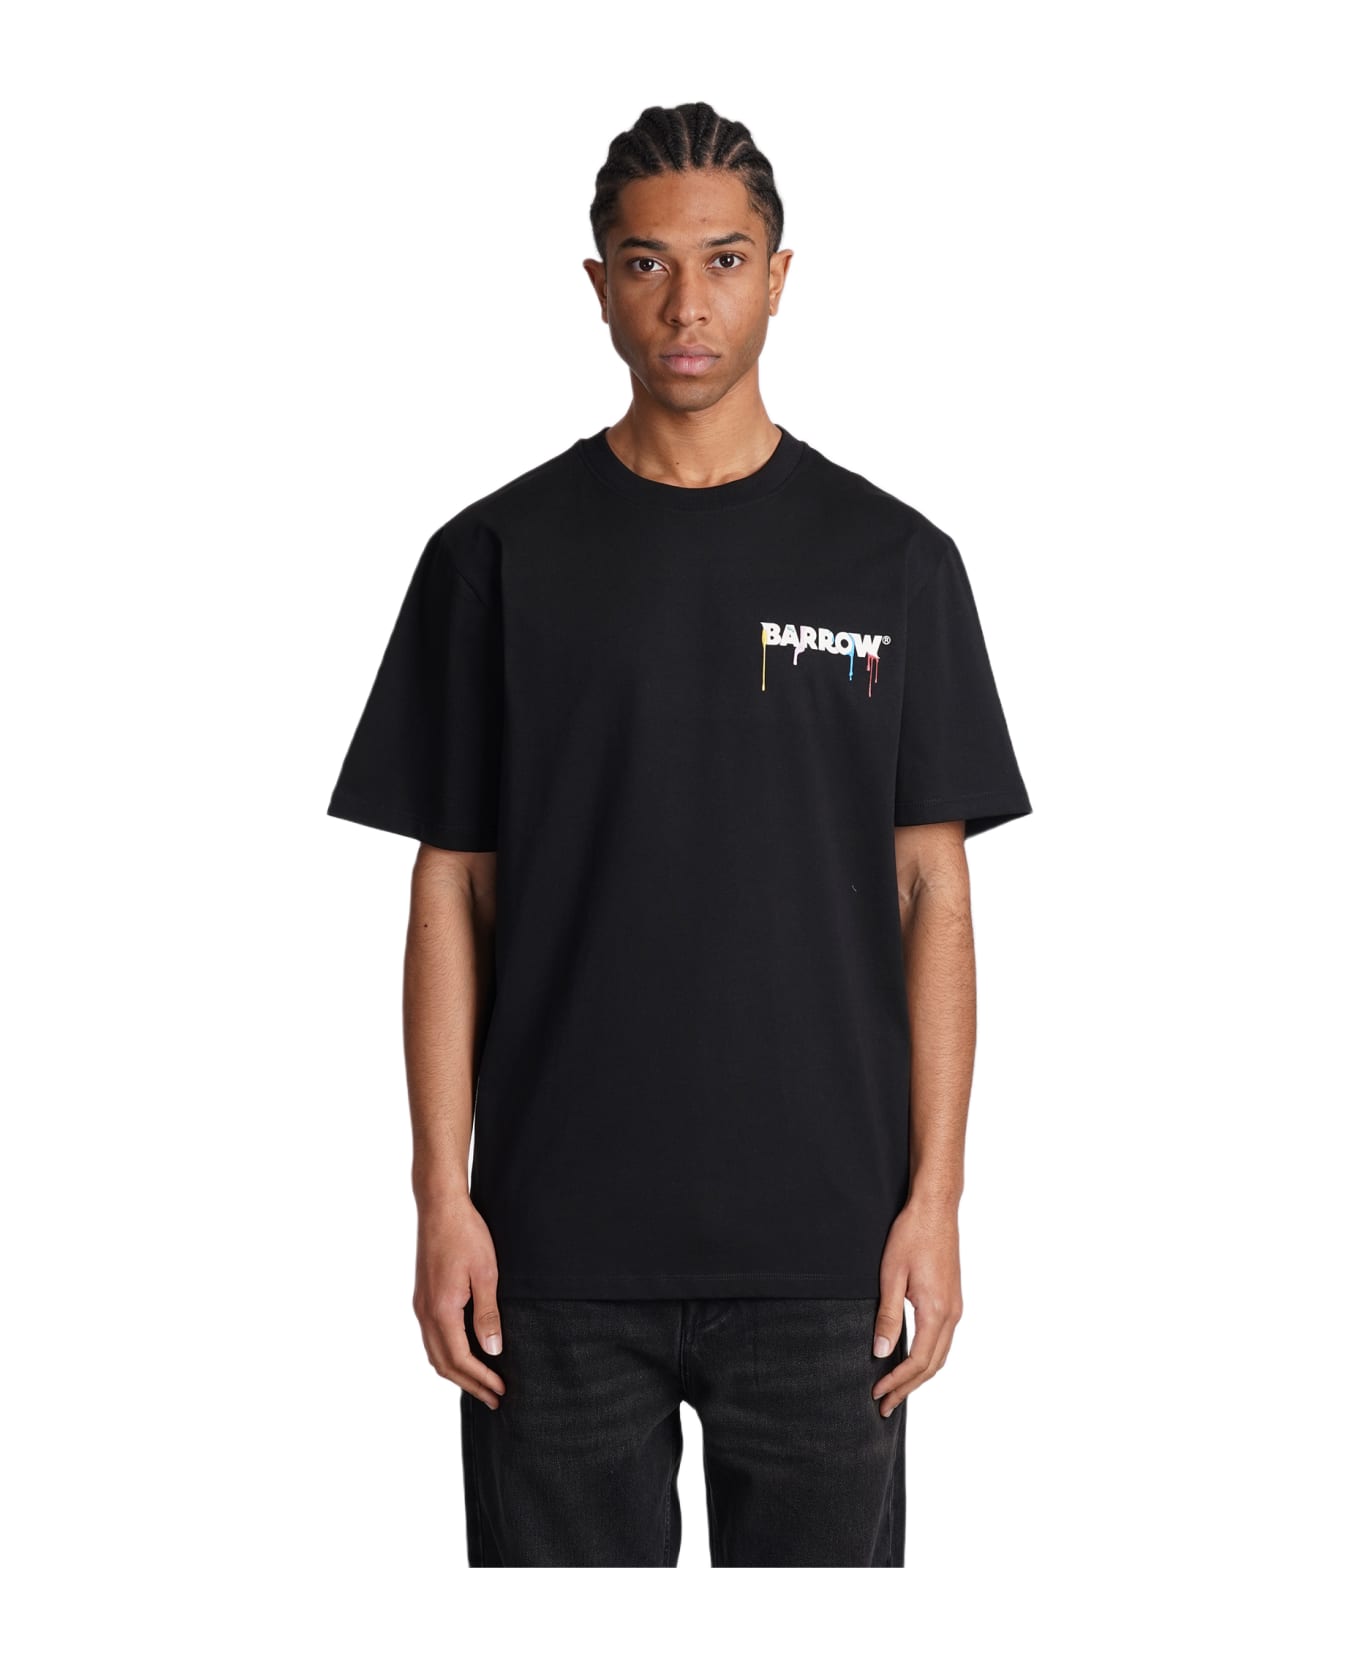 Barrow Black T-shirt With Logo And Colour Spots - Black